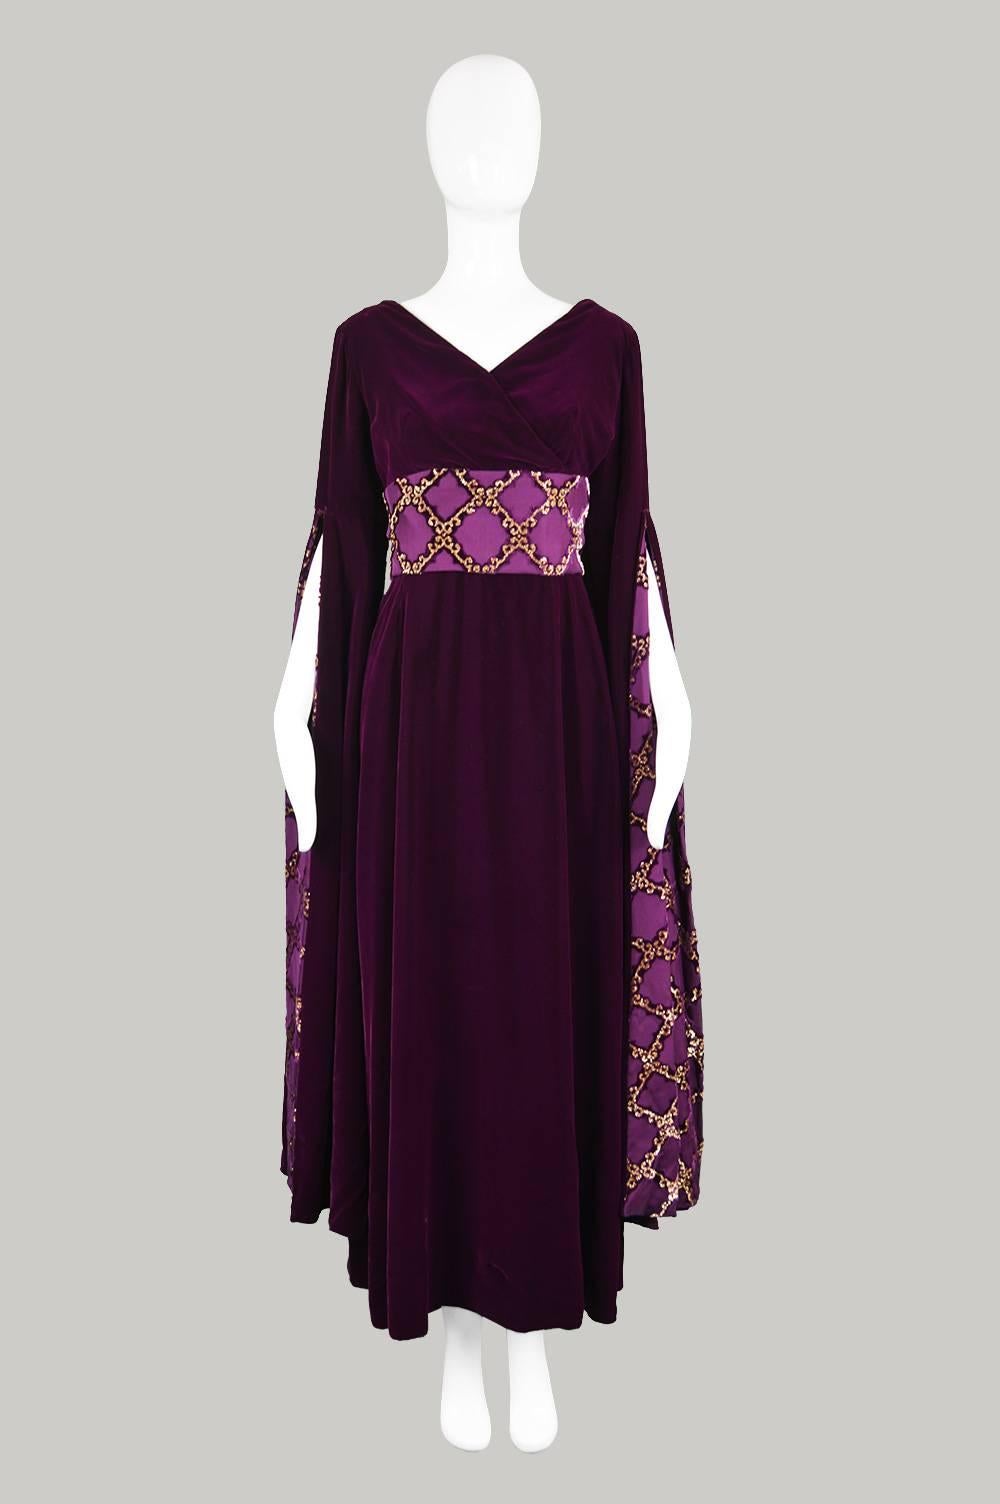 A breathtaking vintage evening dress c.1970, with incredibly long, dramatic sleeves that are lined in a luxurious brocade that create a renaissance/ medieval fairytale inspired look and matches the wide obi belt that hooks around the back creating a